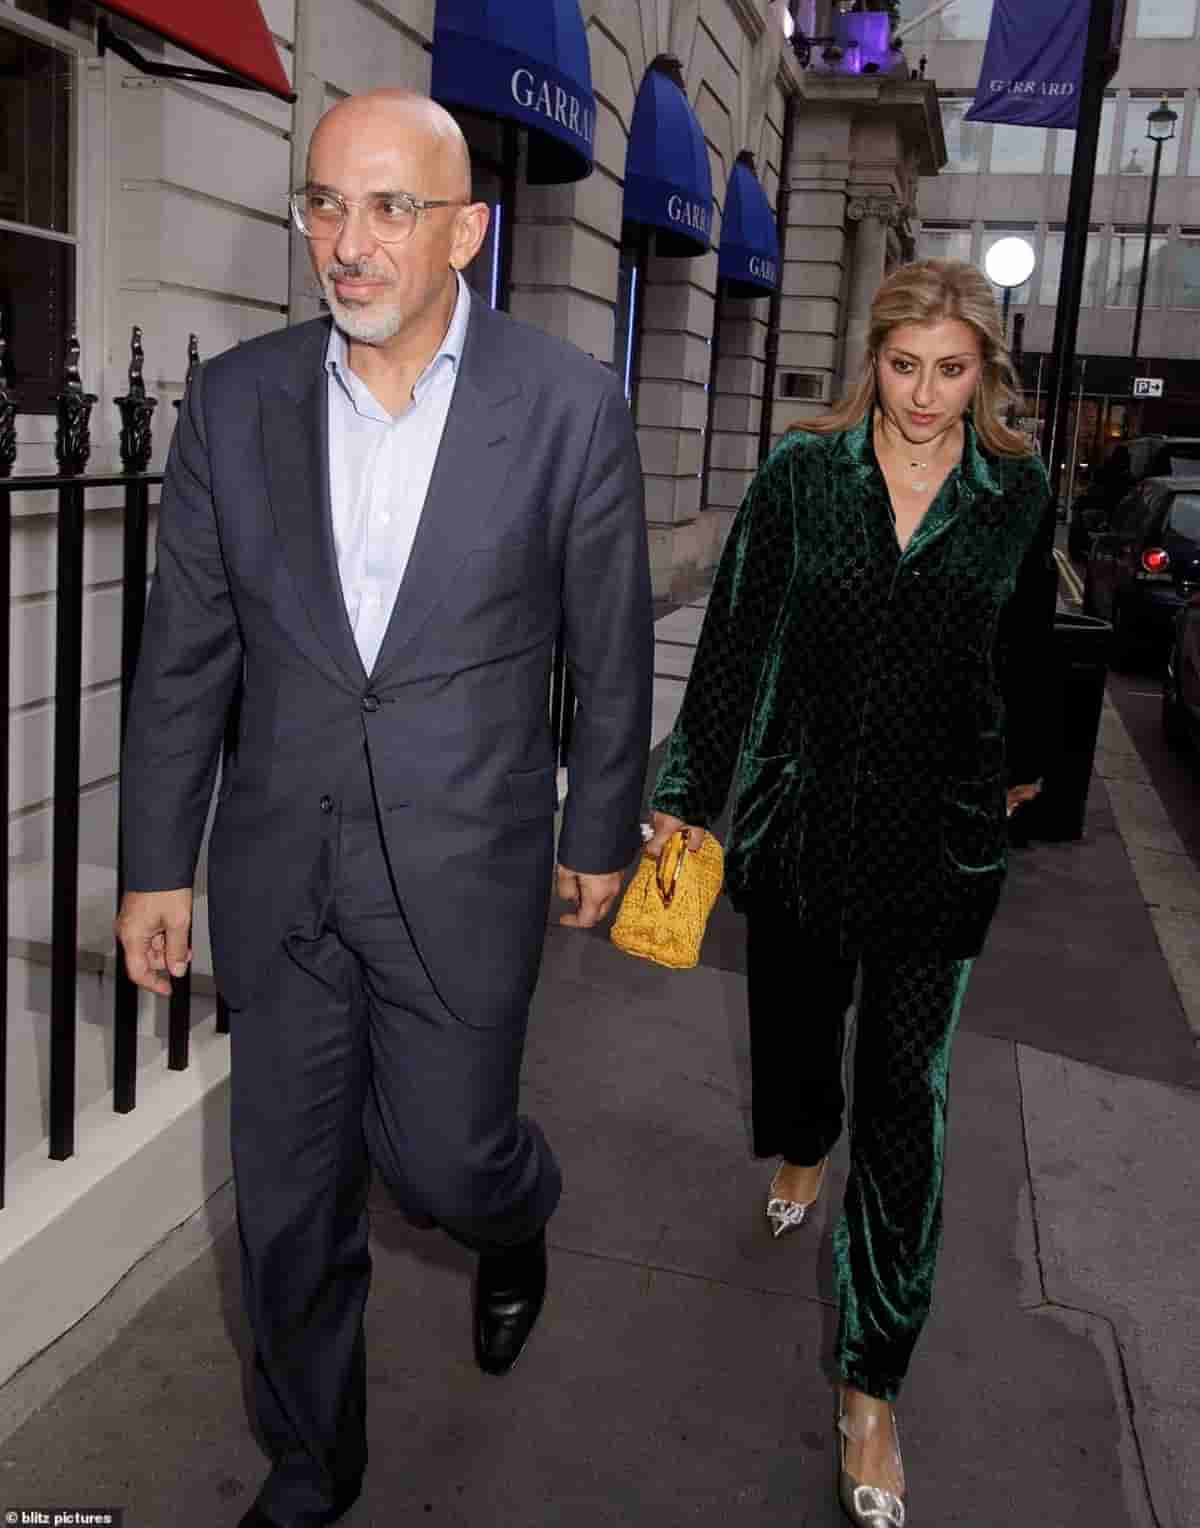 Official_portrait_of_Nadhim_Zahawi_MP and wife